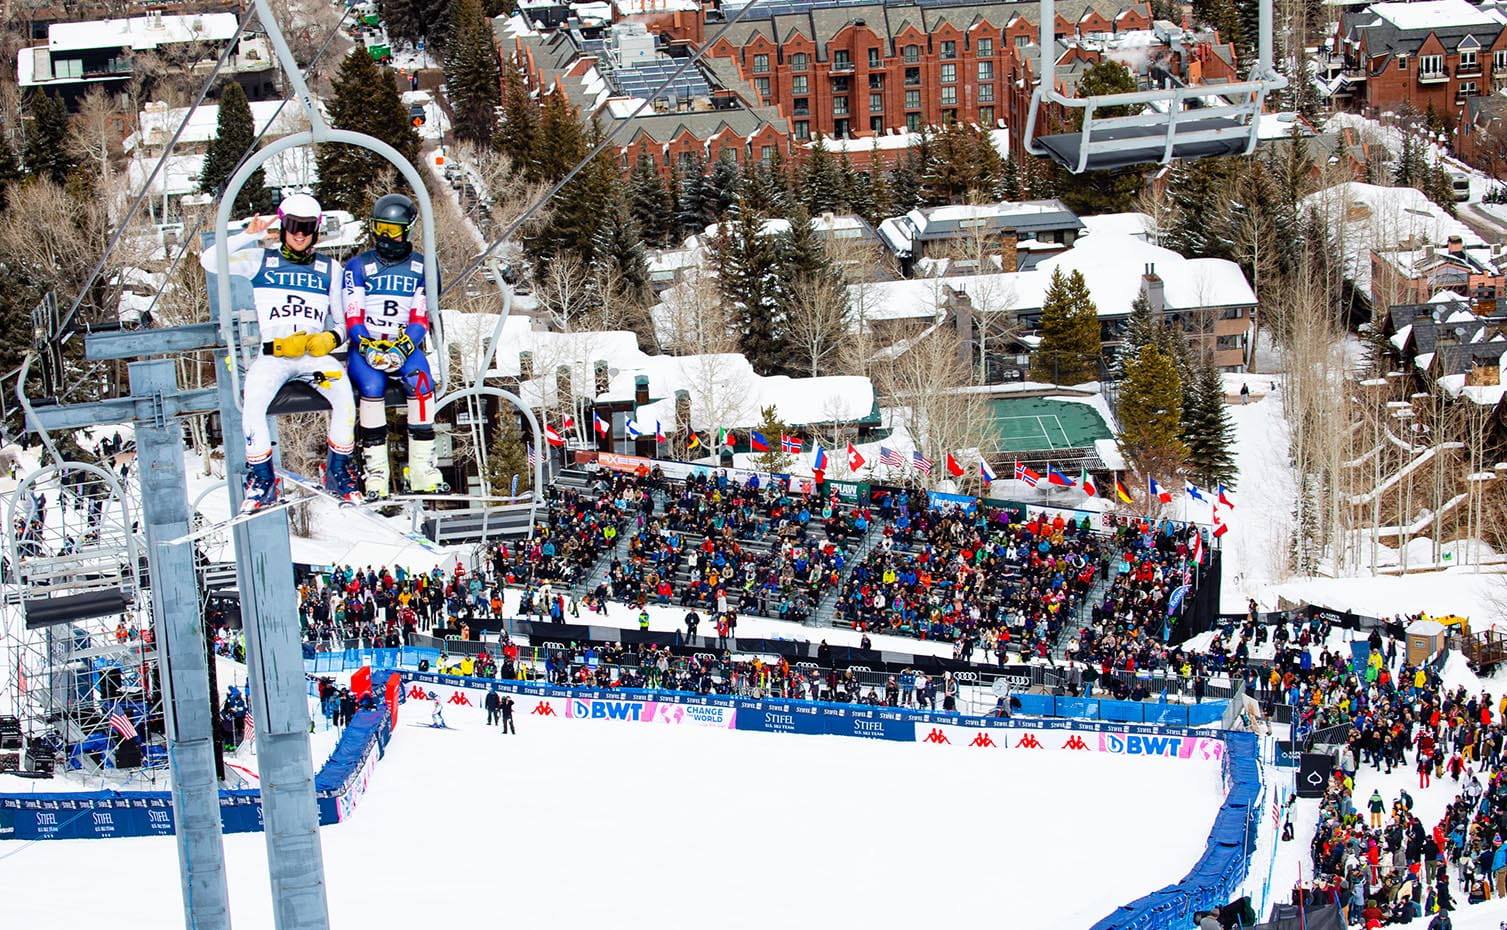 Audi FIS Ski World Cup Skiing Event at Aspen Snowmass